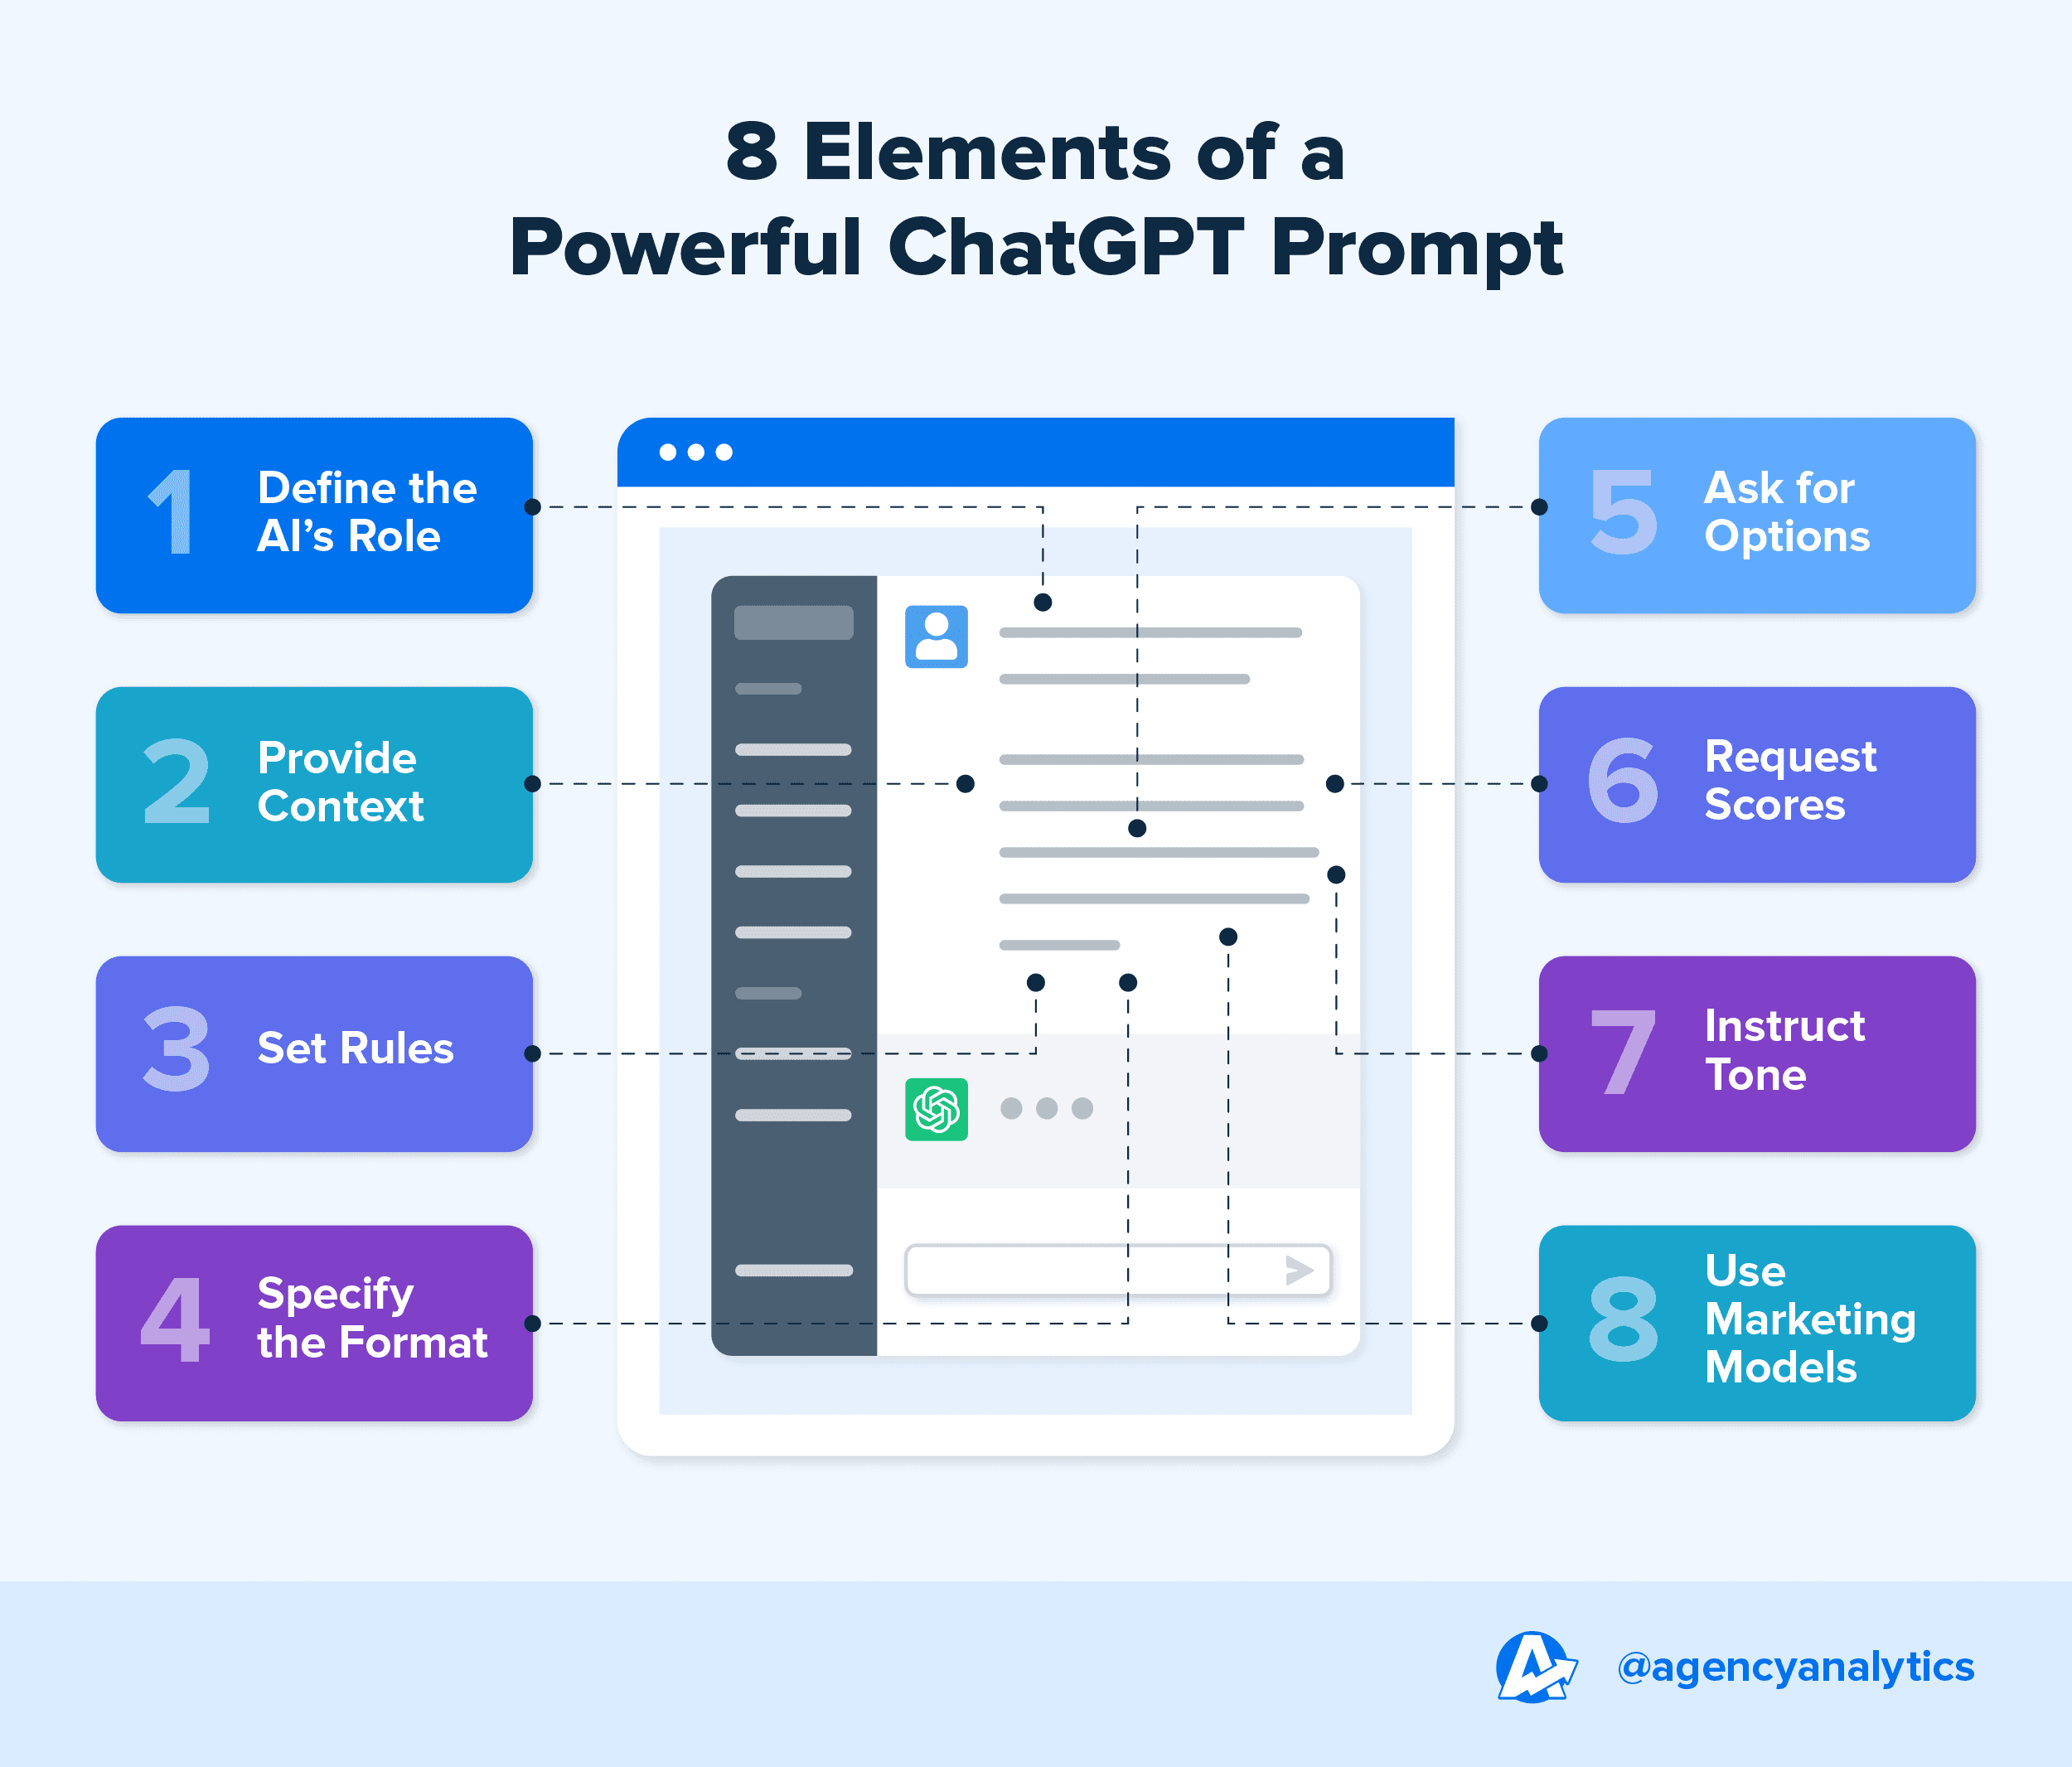 Infographic Showing the 8 Elements of a Powerful ChatGPT Prompt for Marketers